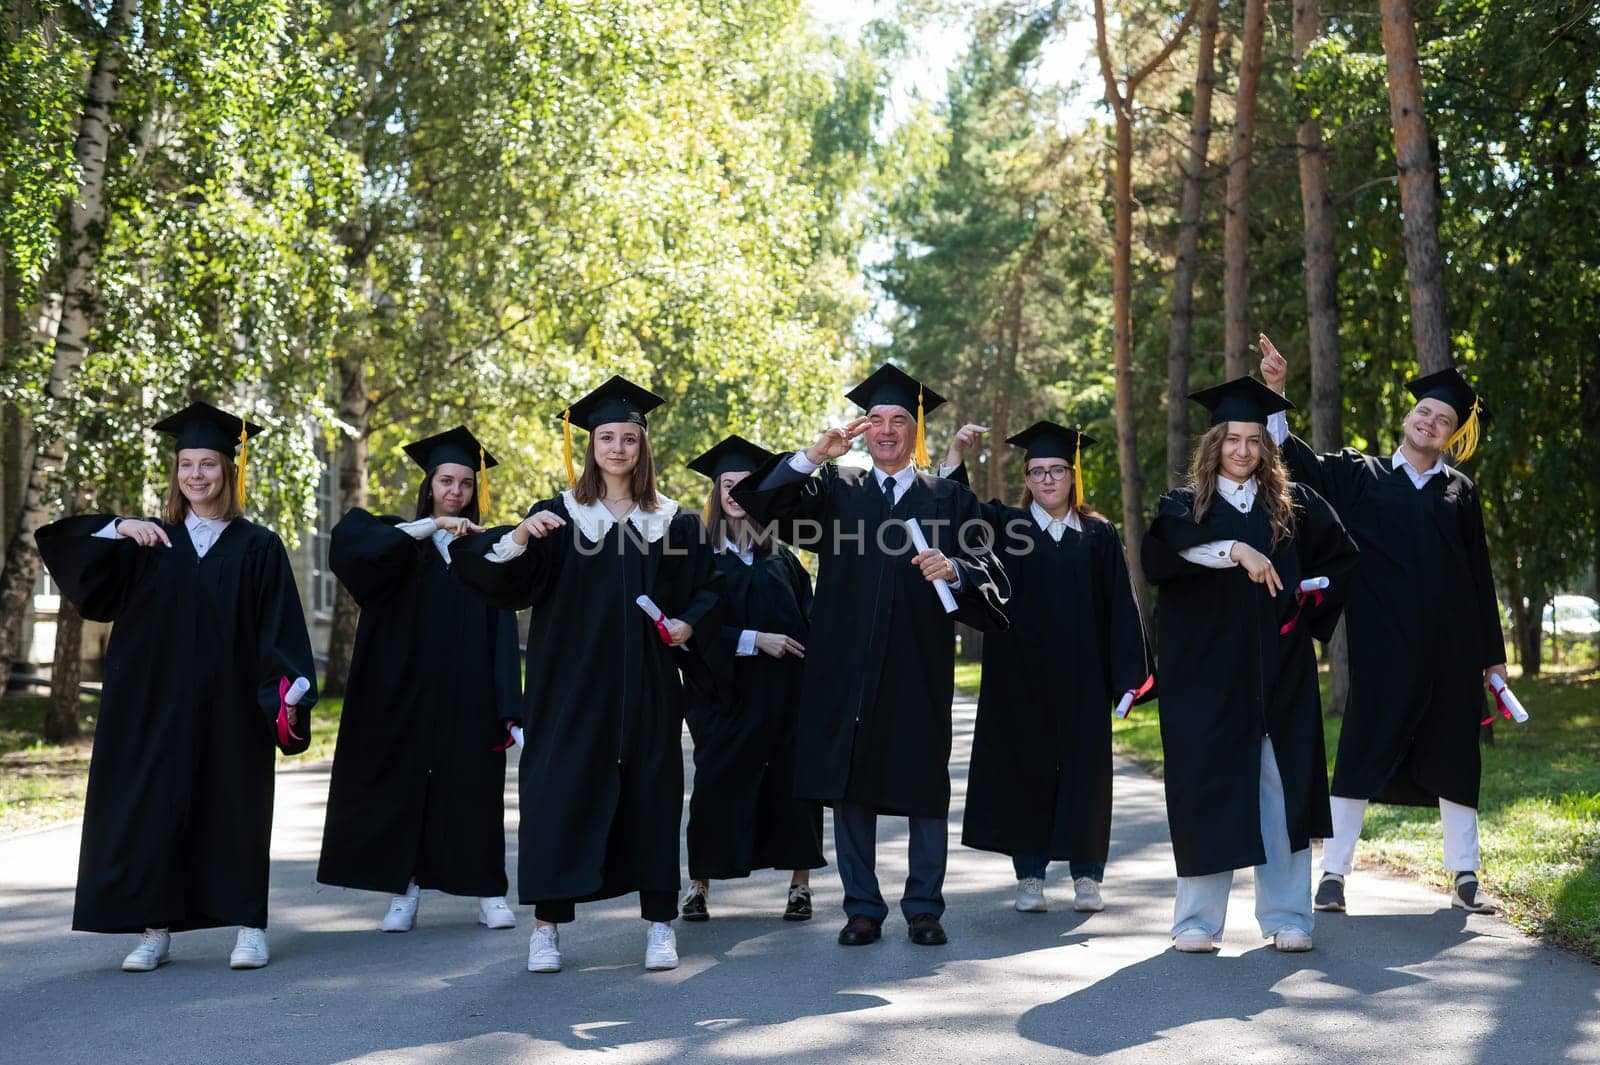 Group of graduates in robes dancing outdoors. Elderly student